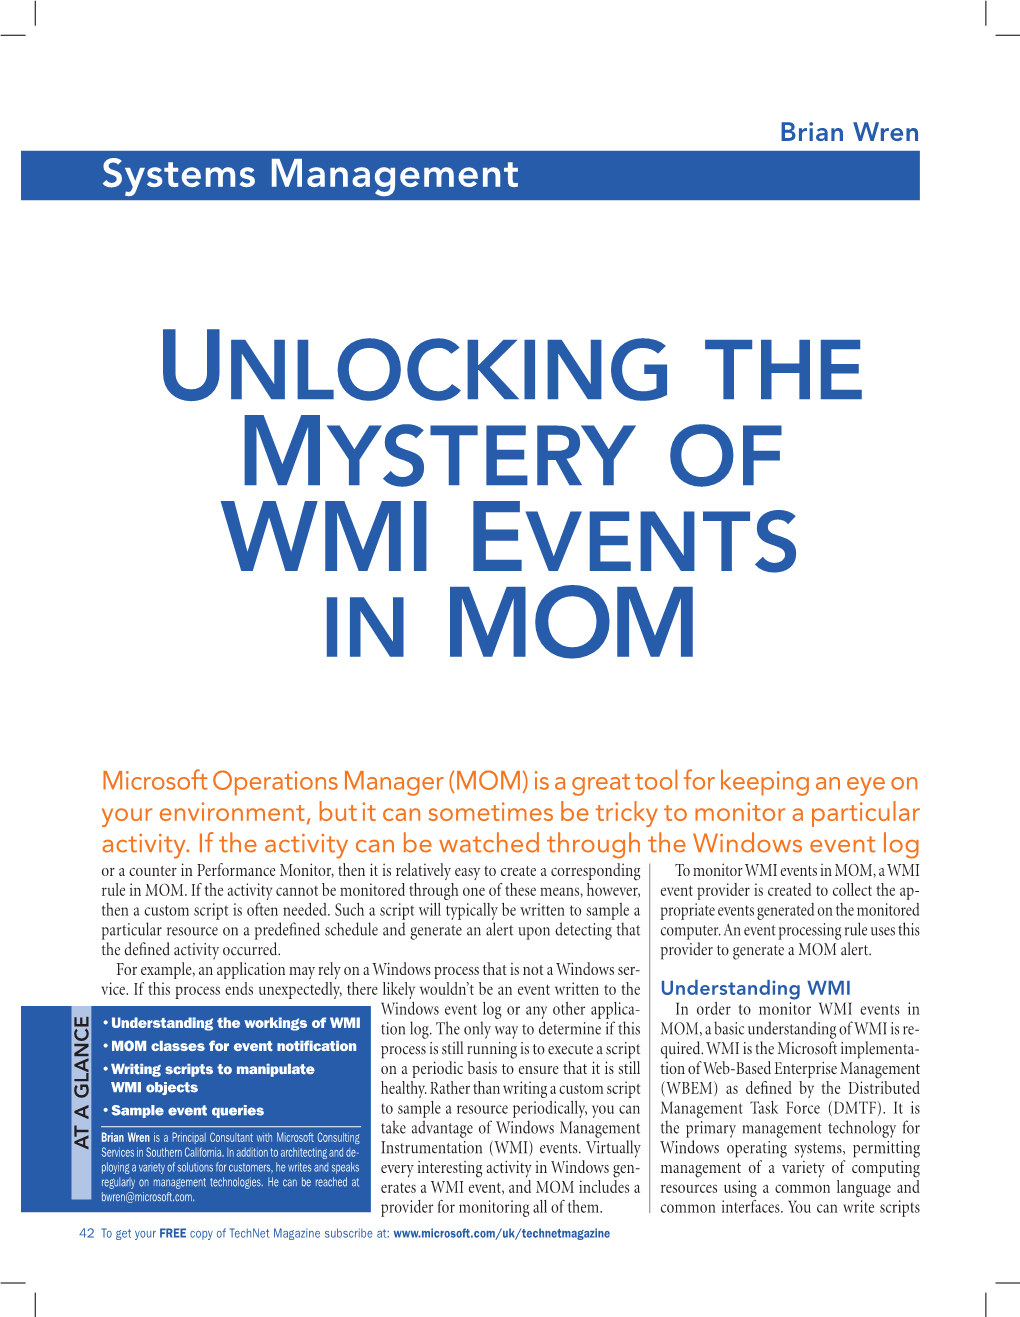 WMI Events in MOM